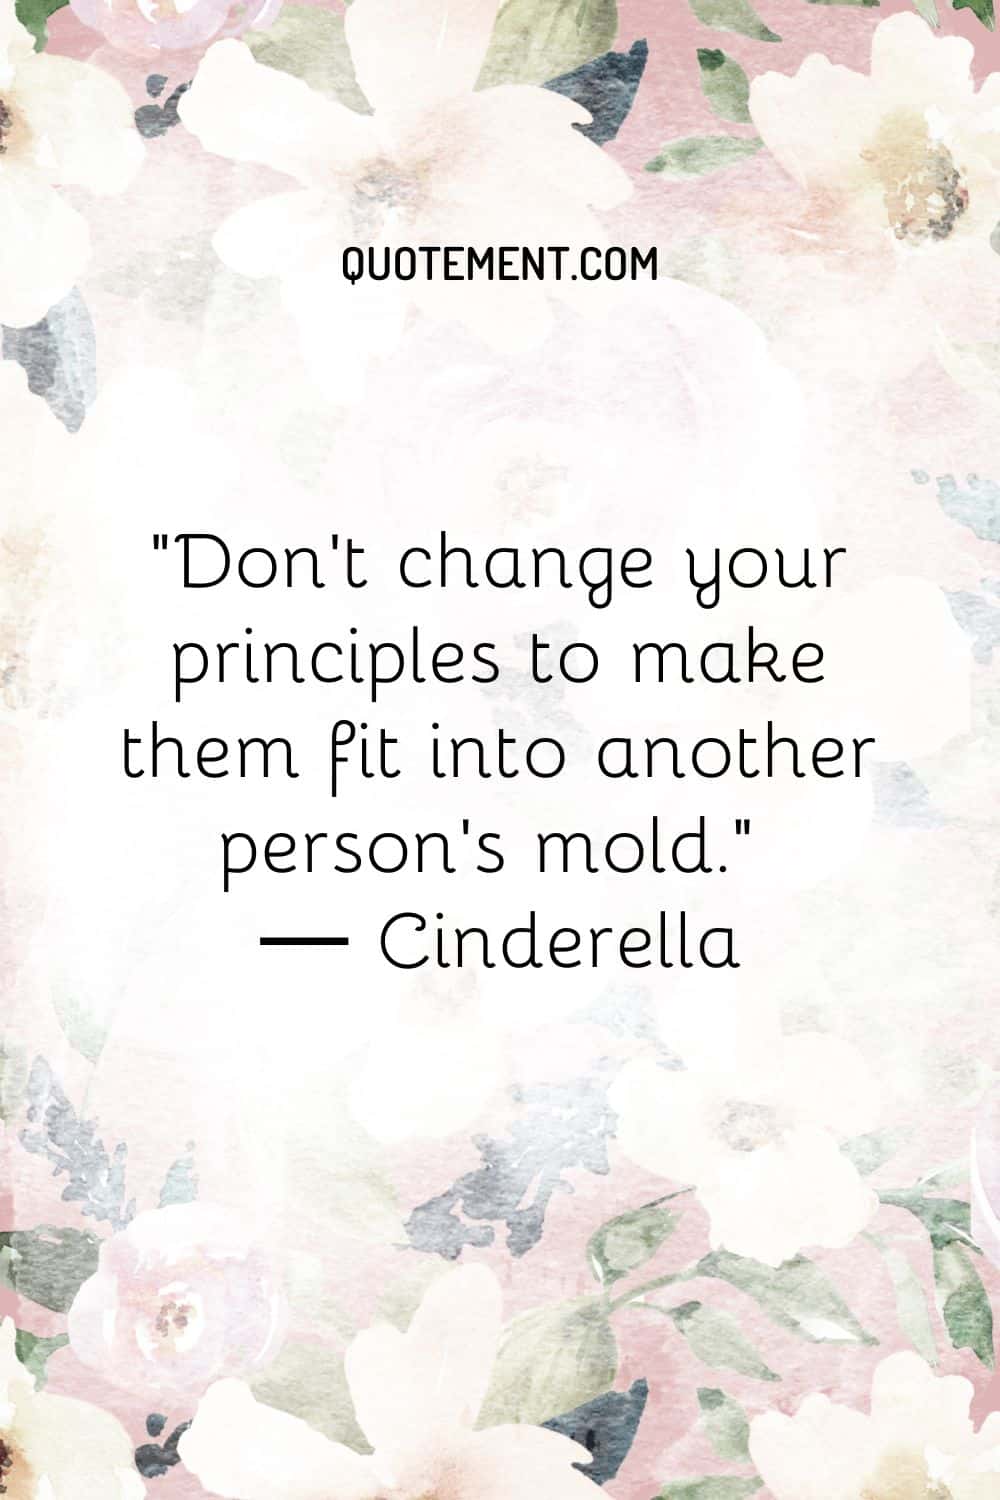 Don’t change your principles to make them fit into another person’s mold